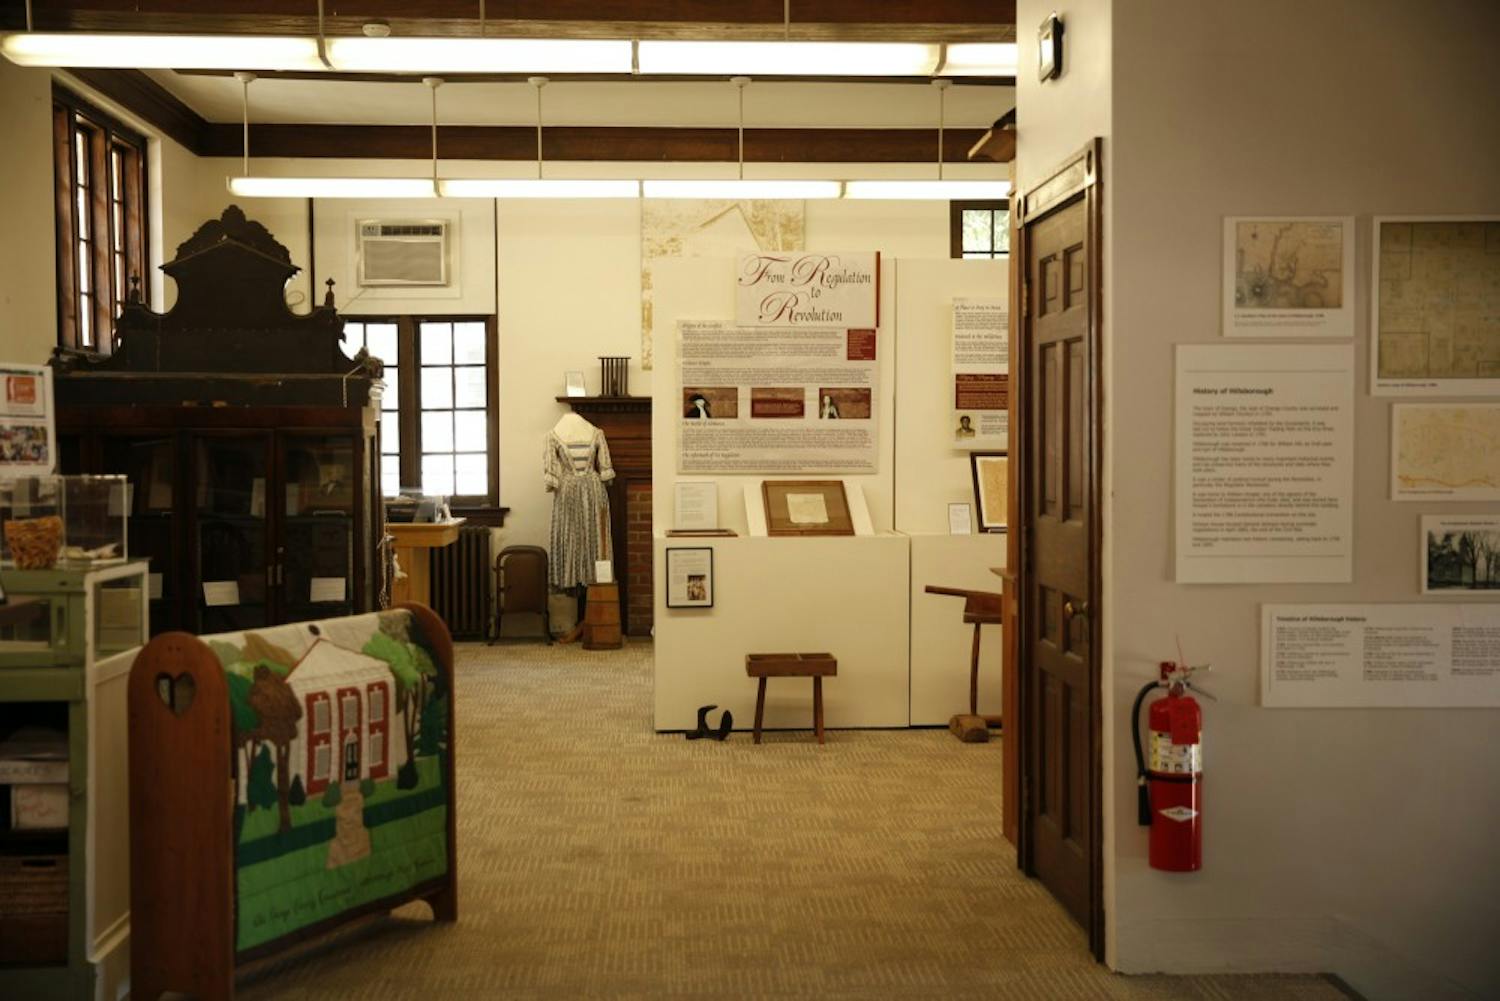 At the Orange County Historical Museum in Hillsborough, North Carolina, visitors are taken into the past through artifacts and stories.